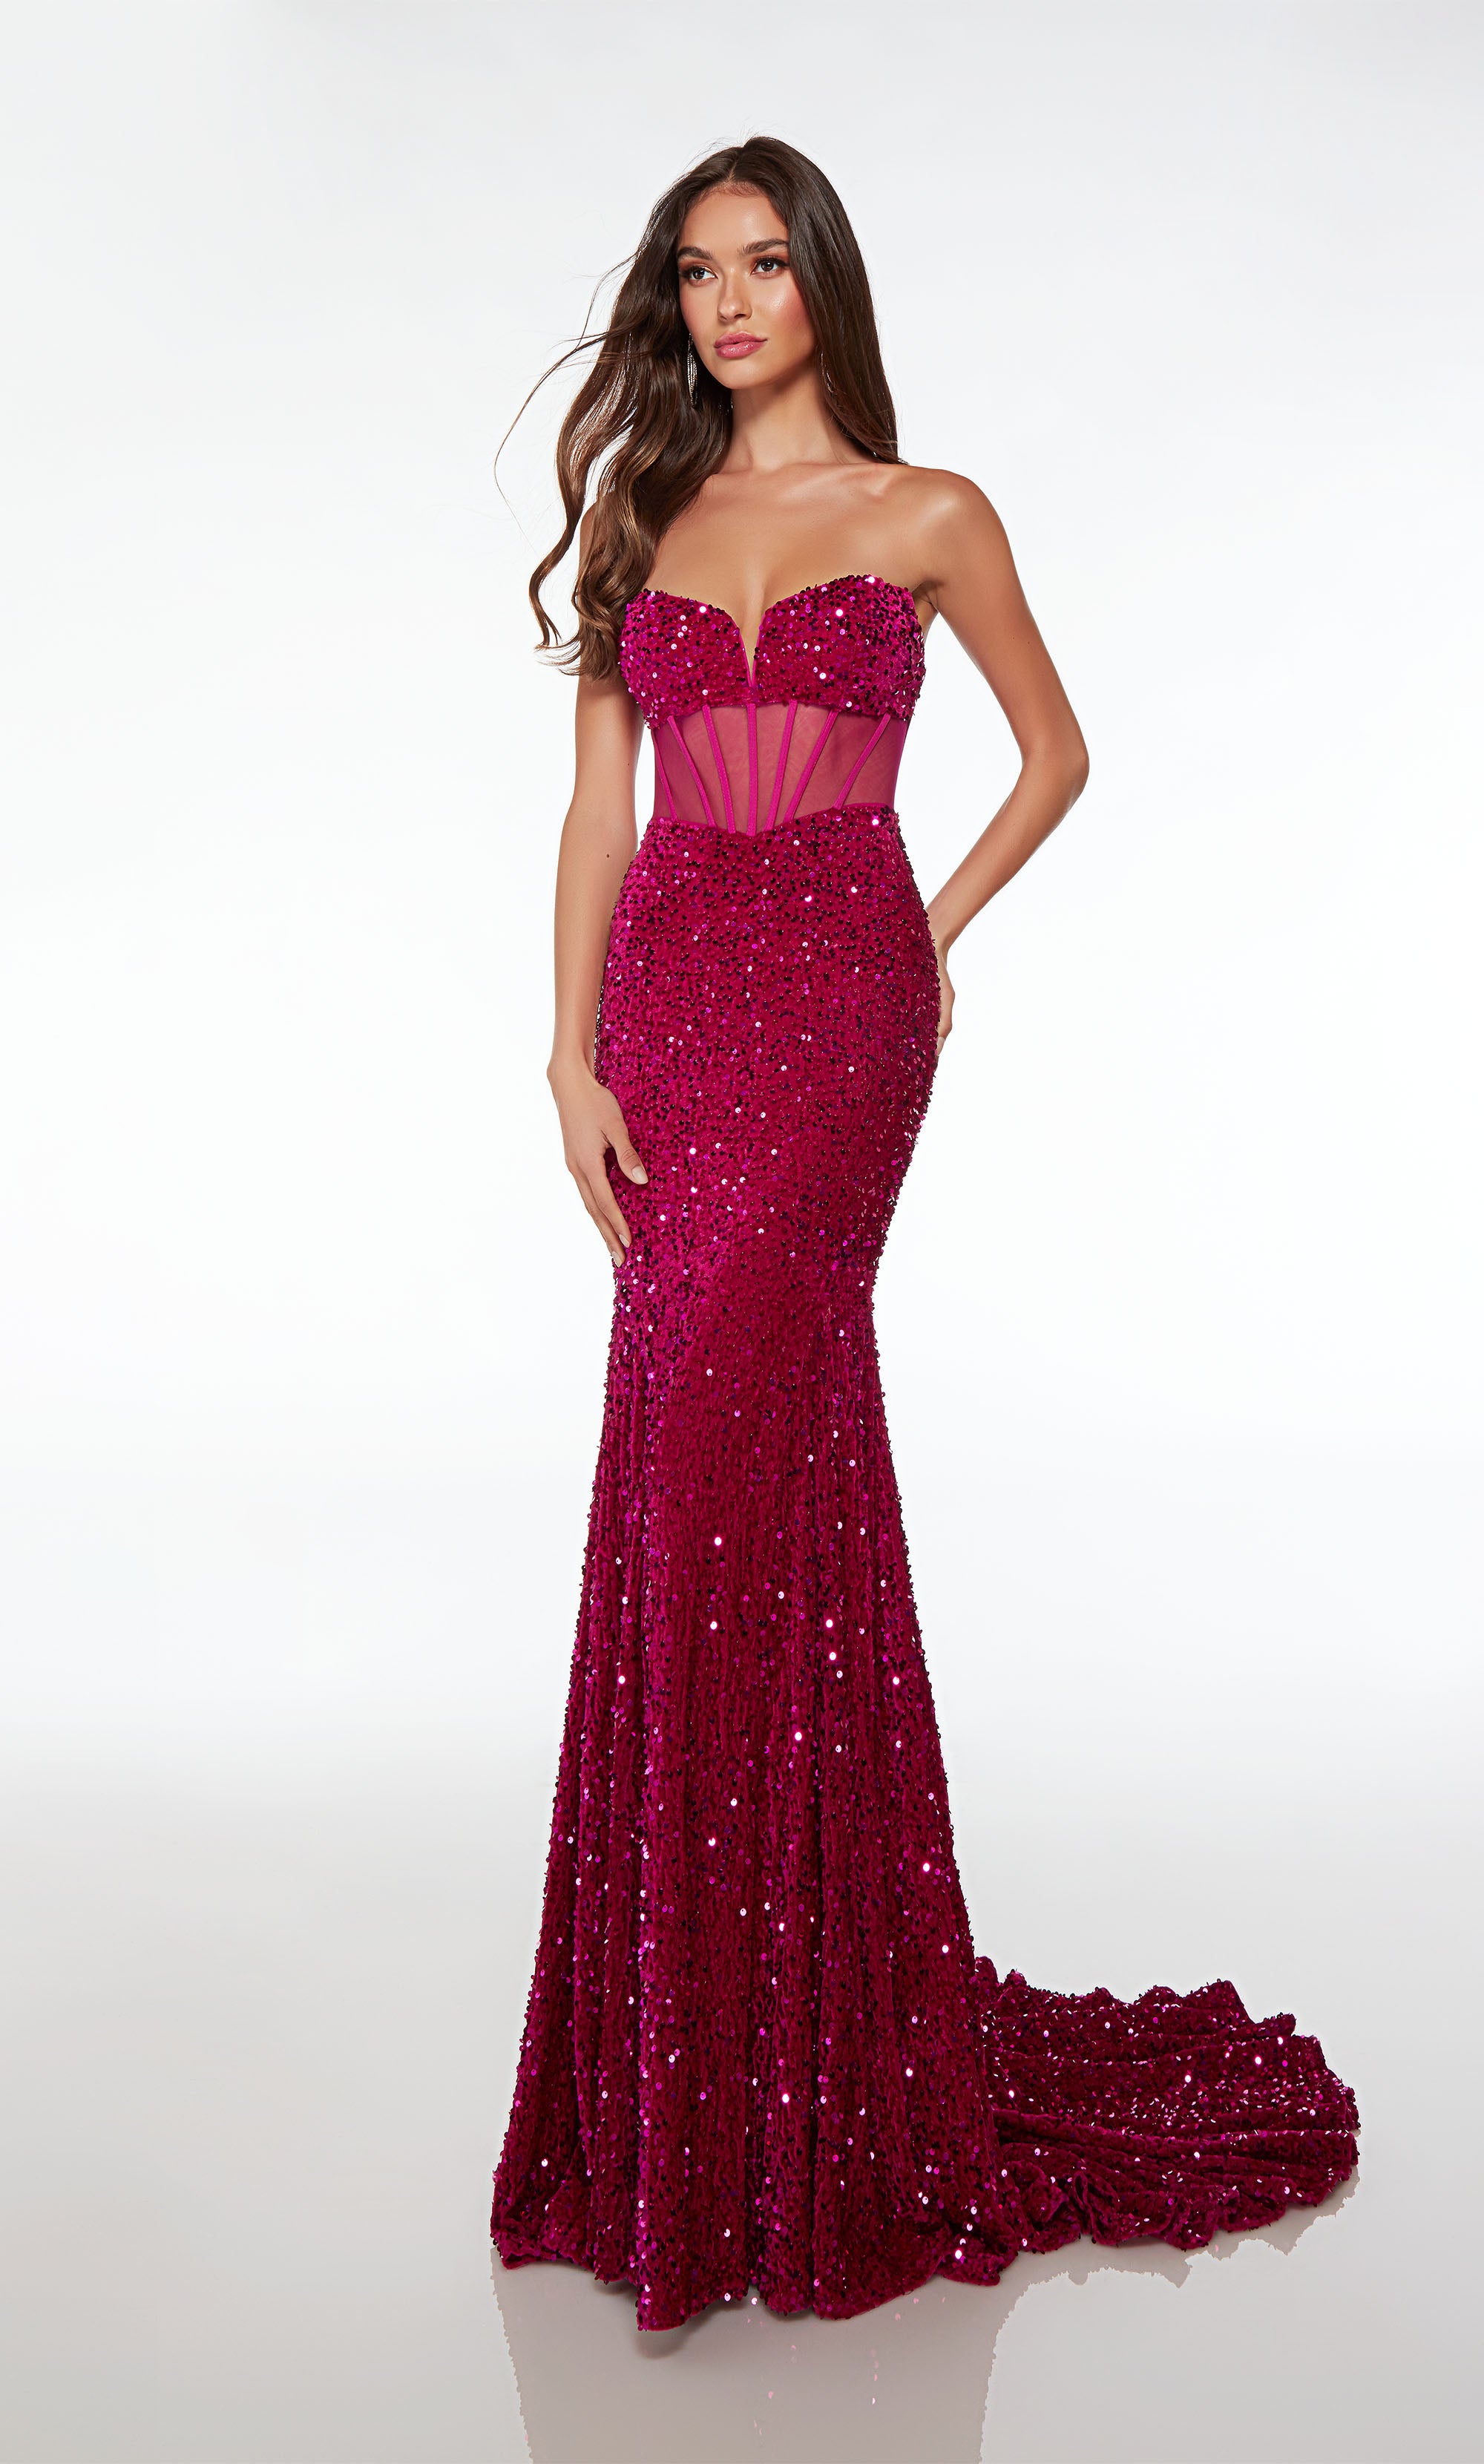 Chic pink sequin gown: strapless sweetheart neckline, sheer corset, fit-and-flare skirt, long train, exuding glamour and sophistication.